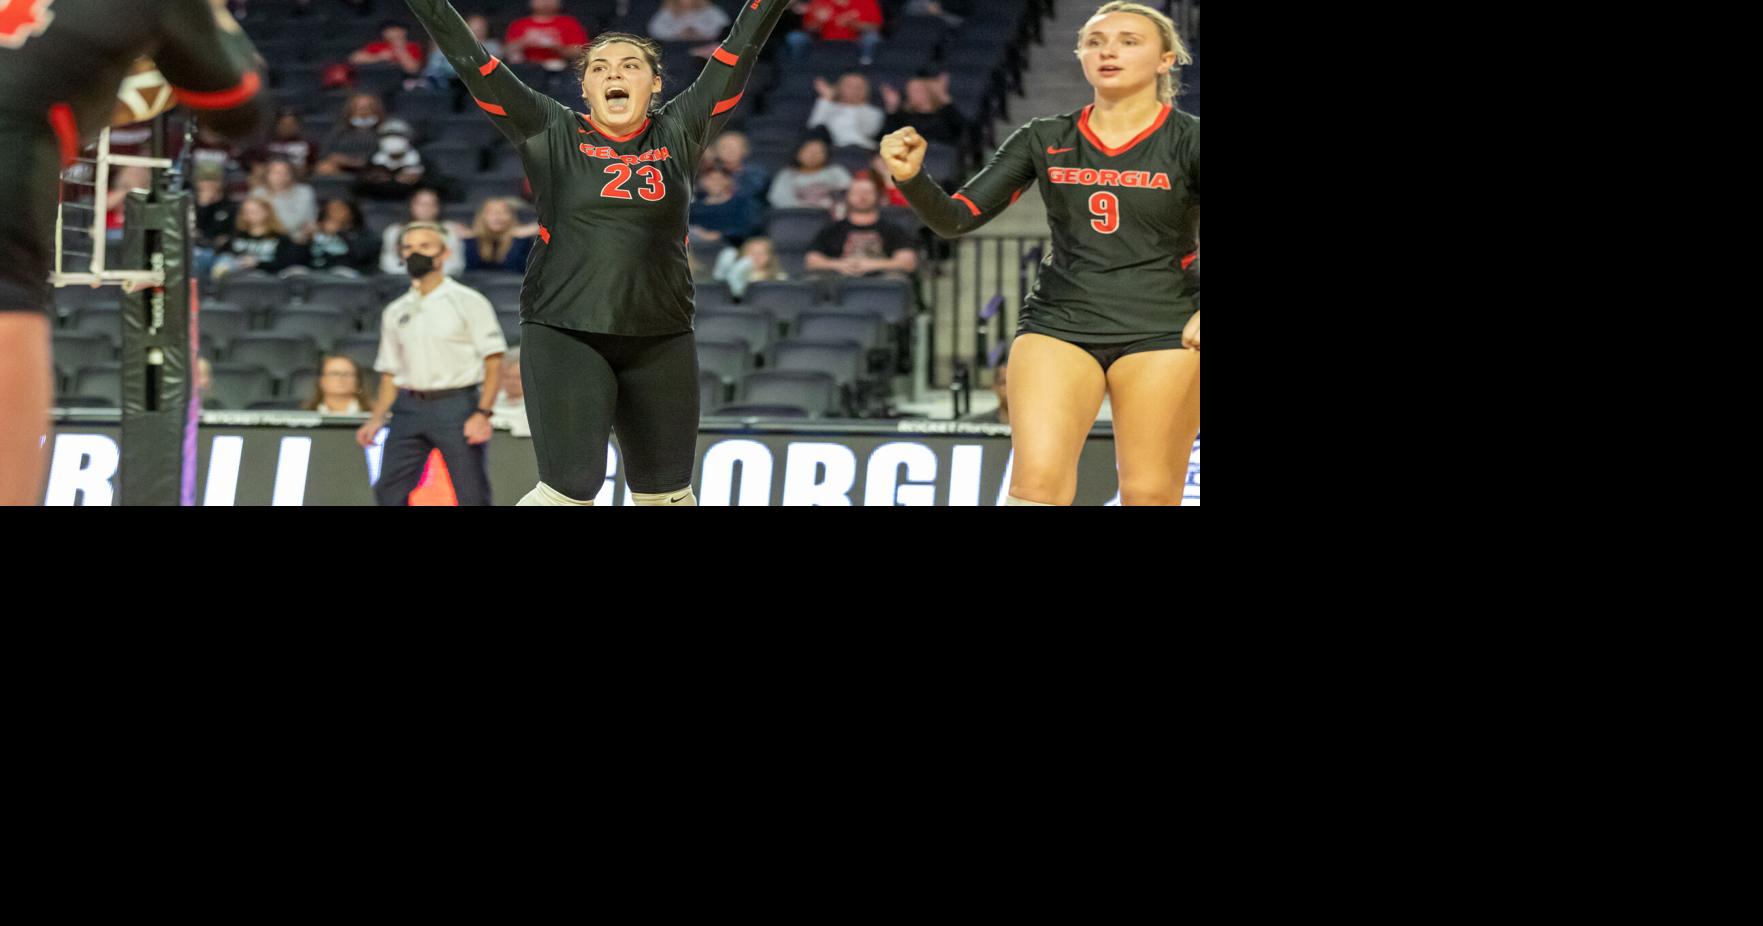 Georgia volleyball sweeps Chattanooga and Santa Clara to extend hot start